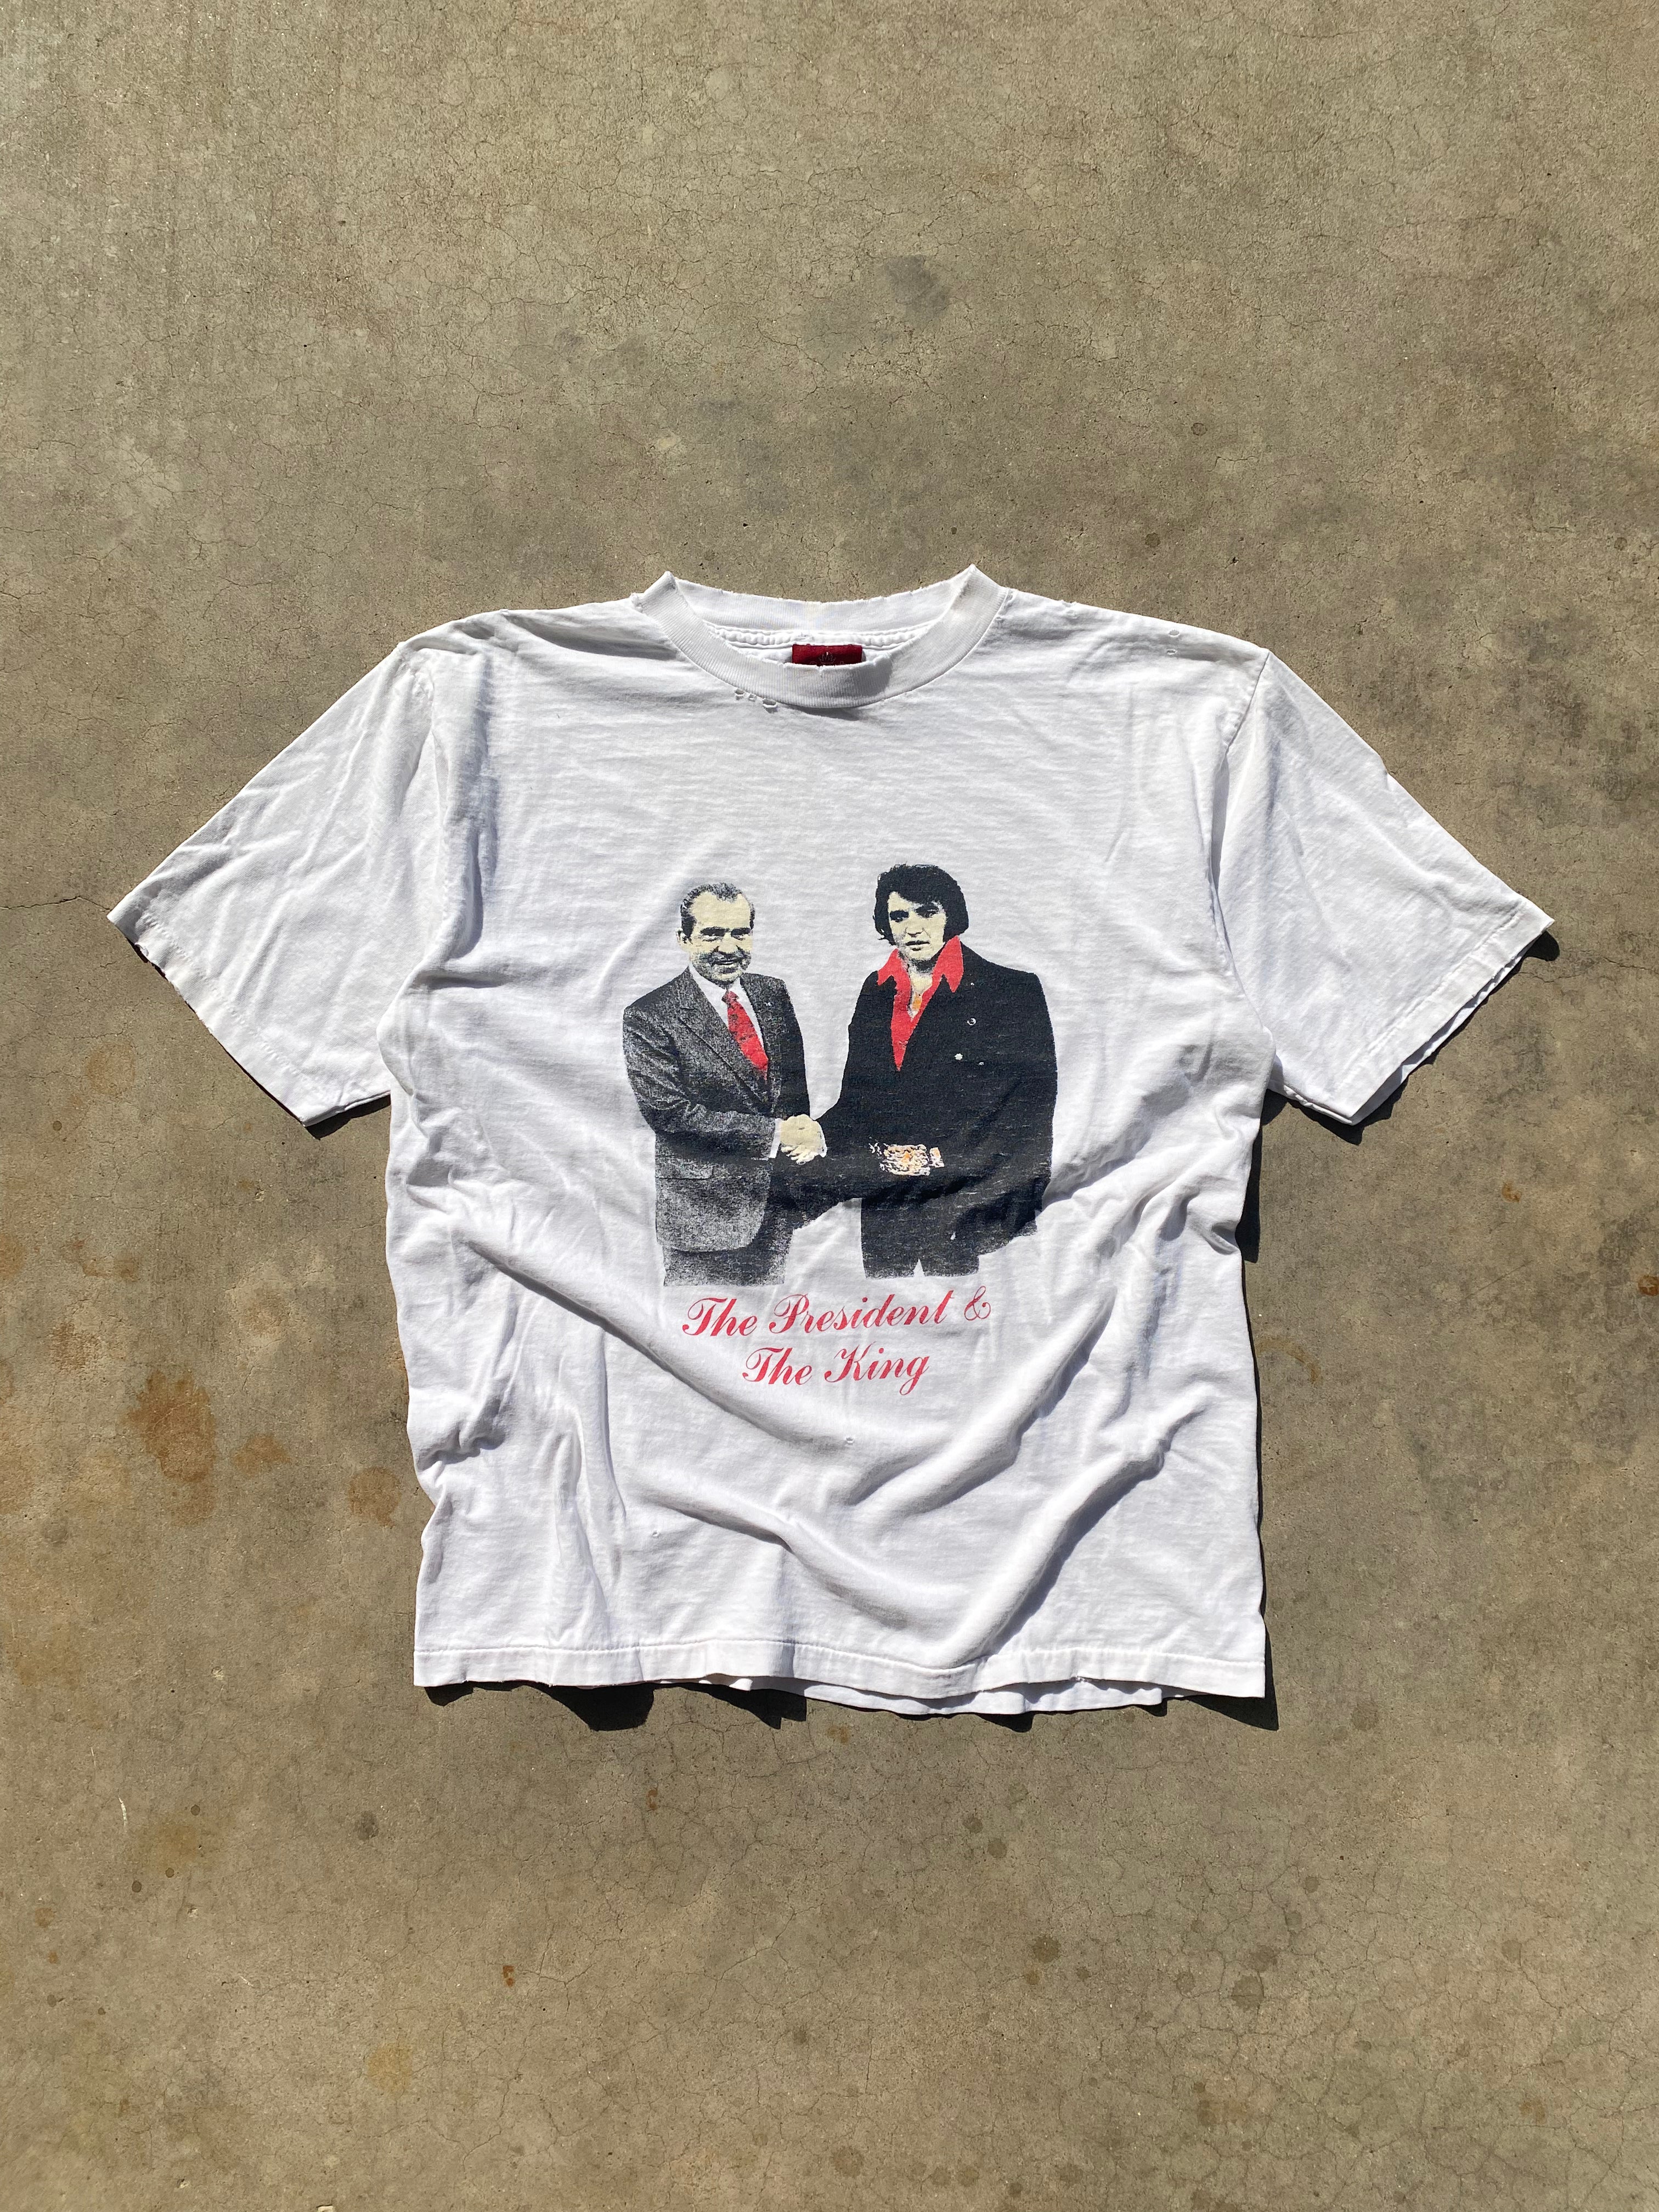 1990s Distressed The President & The King T-Shirt (M/L)